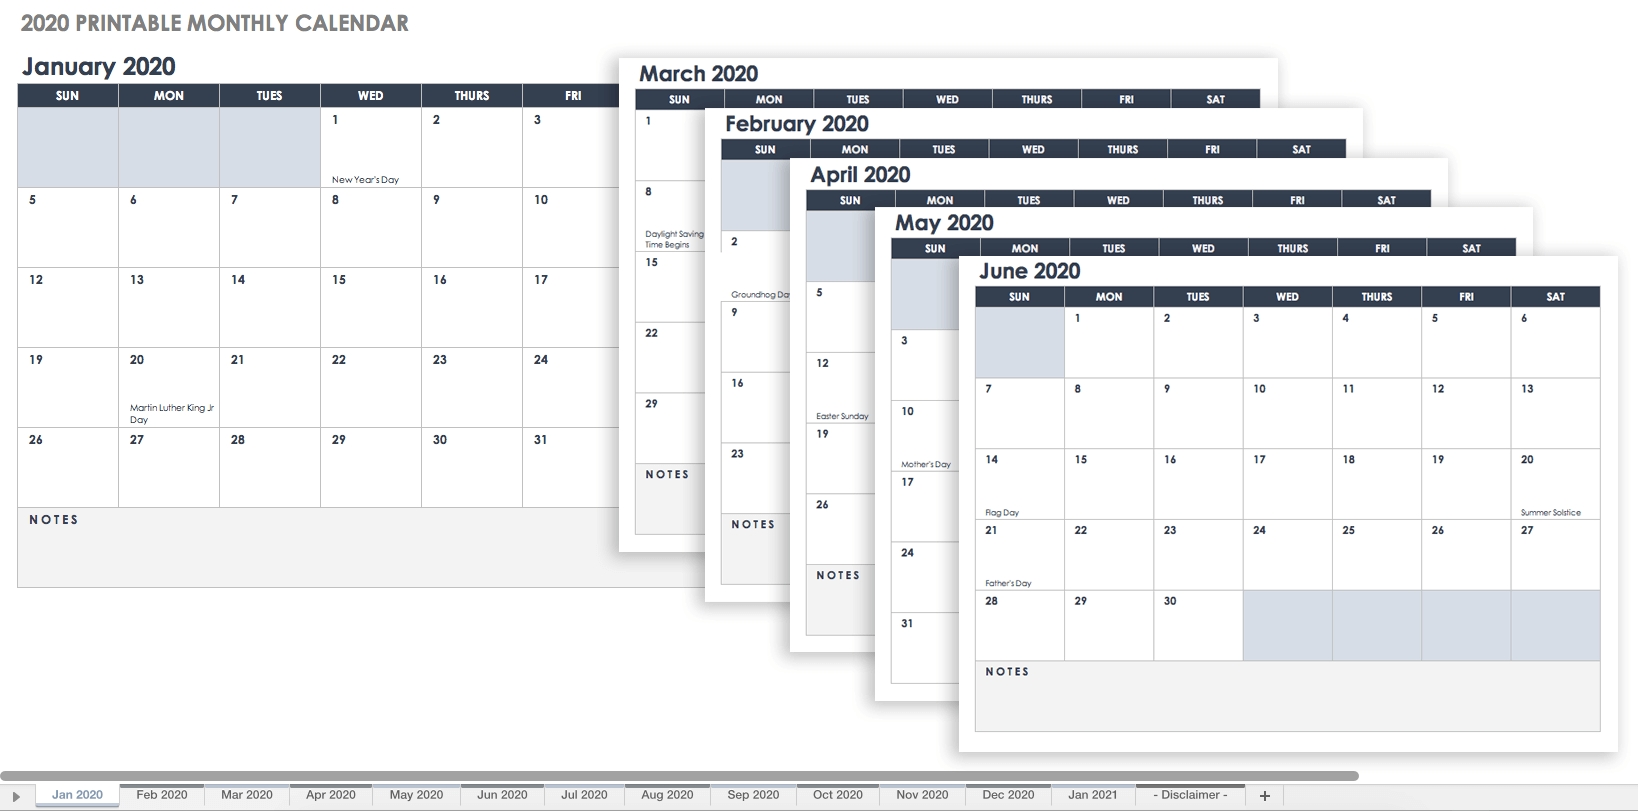 Free Excel Calendar Templates-Free Printable Monthly Calendar 2020 With Time Slots